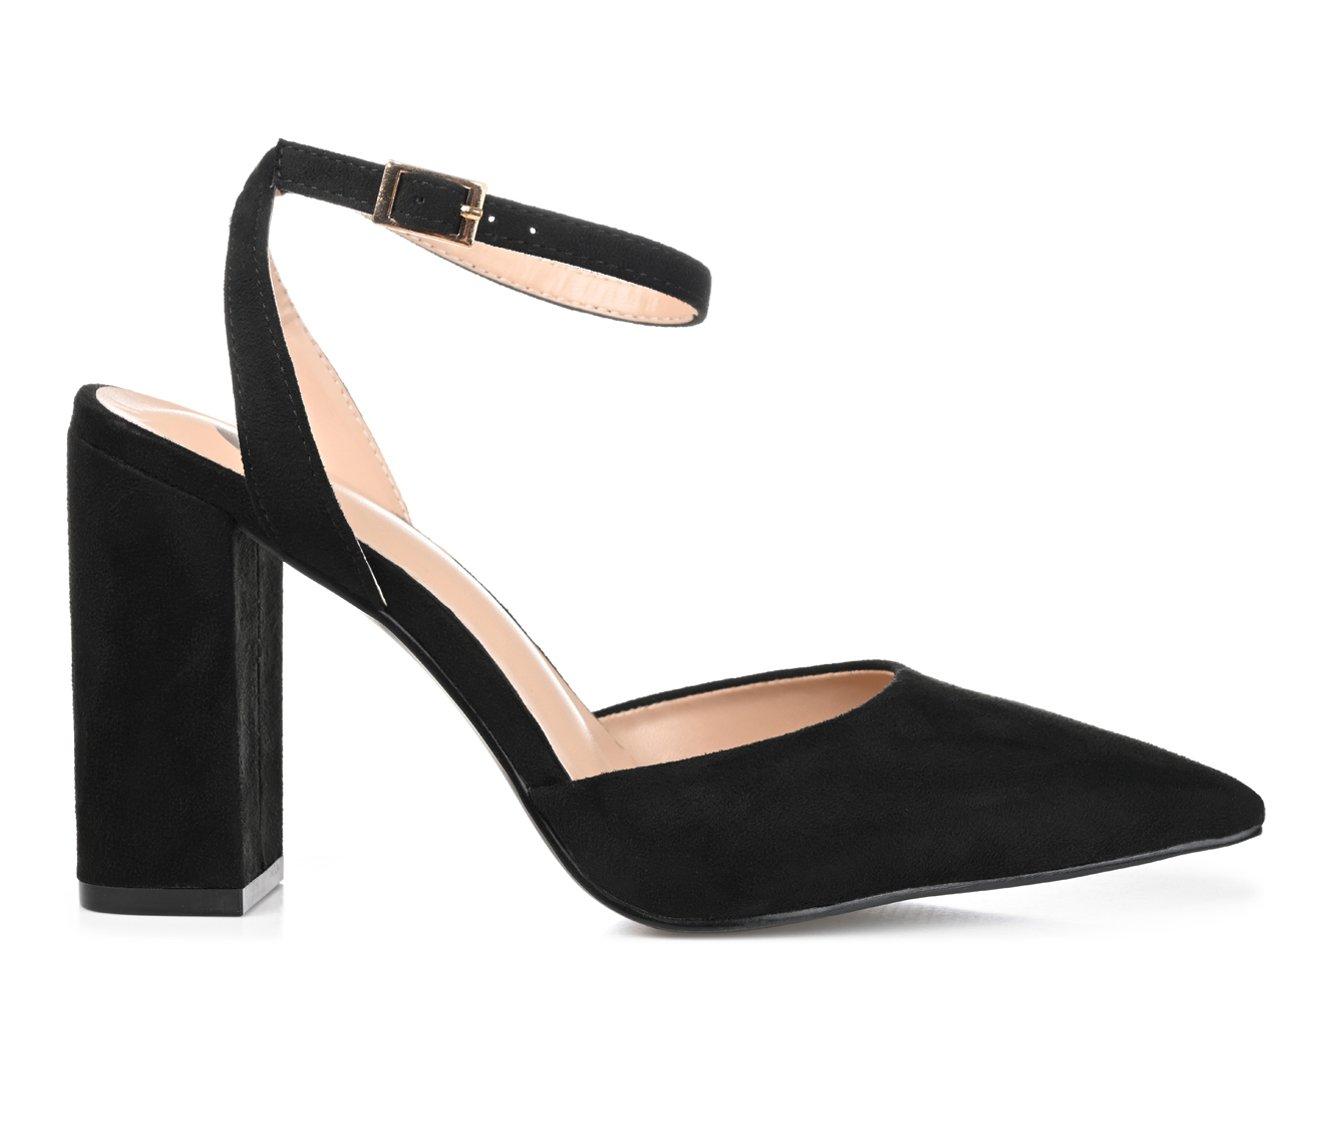 Journee Collection Tyyra Pumps